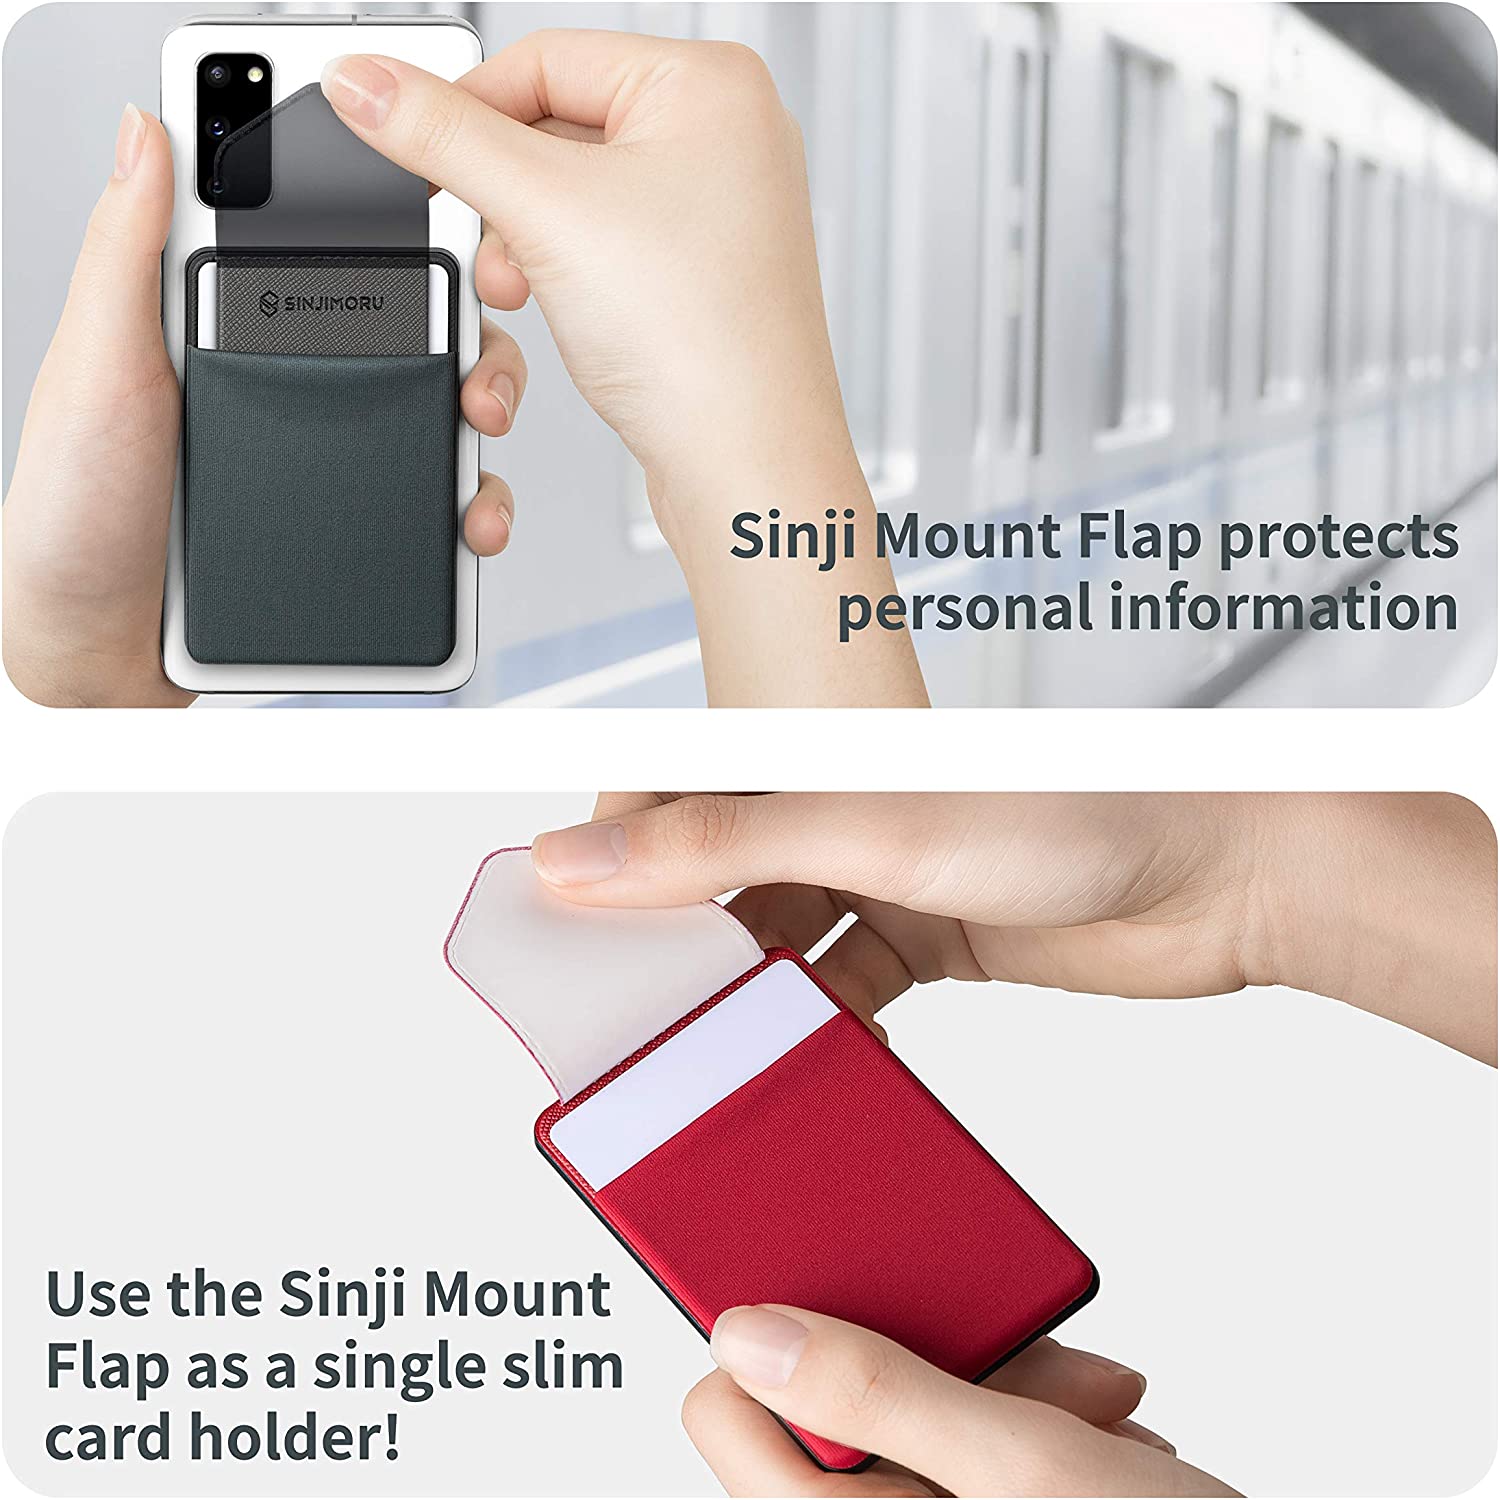 Sinjimoru Removable Cell Phone Wallet with Flap, Wireless Charging Compatible Cell Phone Card Holder for Back of Phone, Sinji Mount Flap, Navy. - e4cents